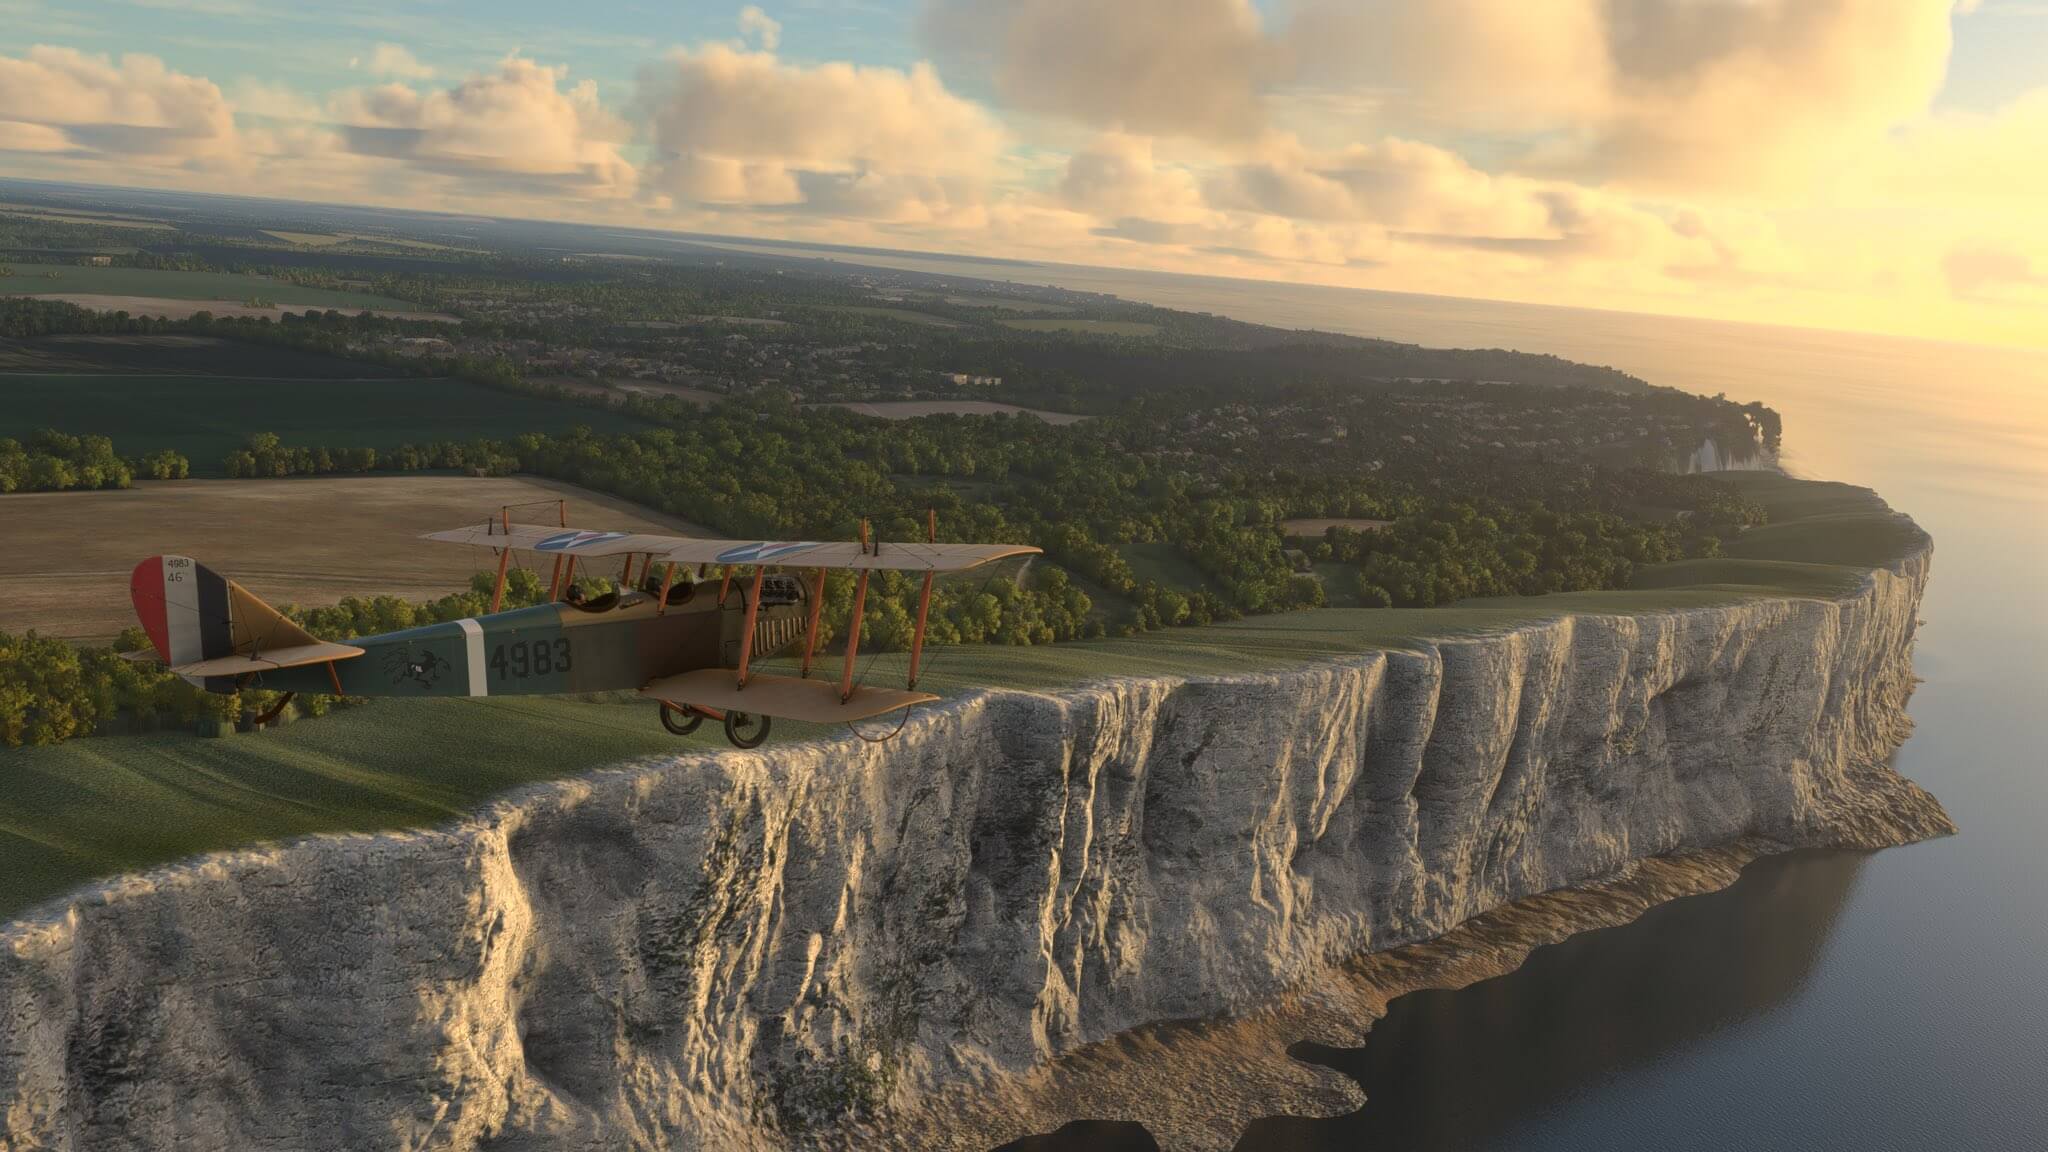 A Bi-wing propeller aircraft in military paint flies close to the white cliffs of Dover, England